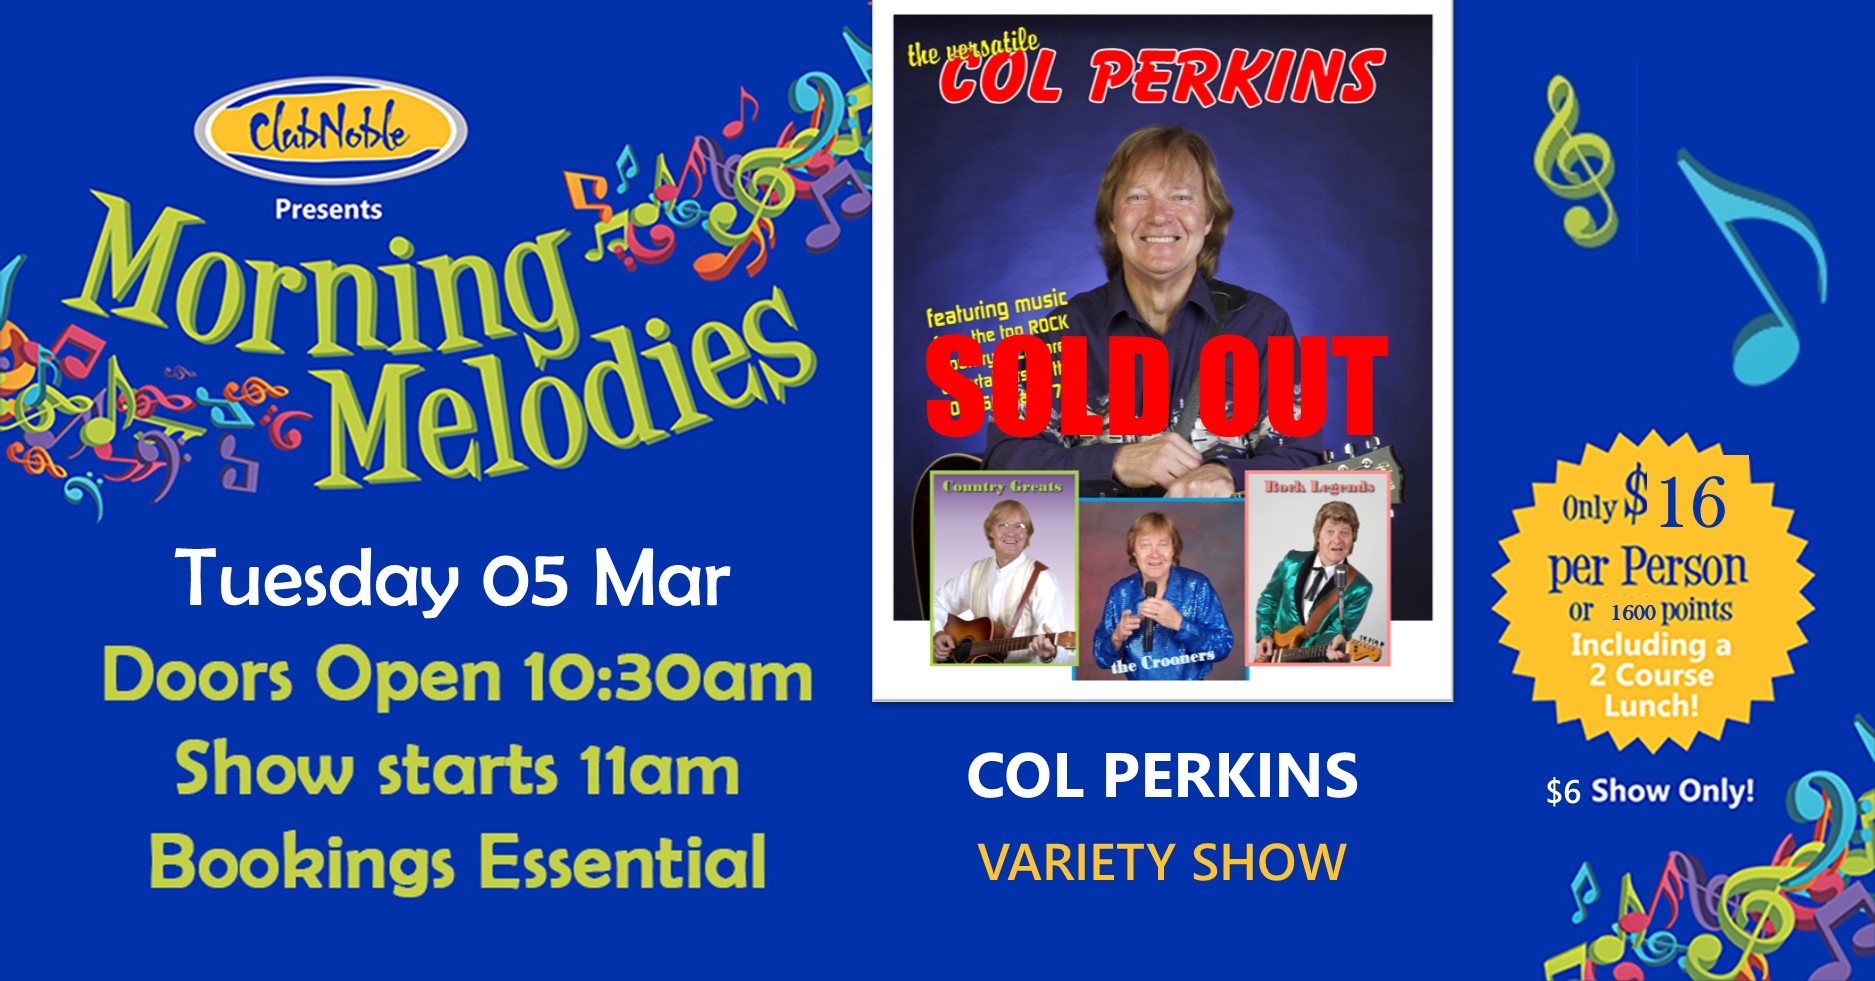 Morning Melodies presents The Versatile Col Perkins